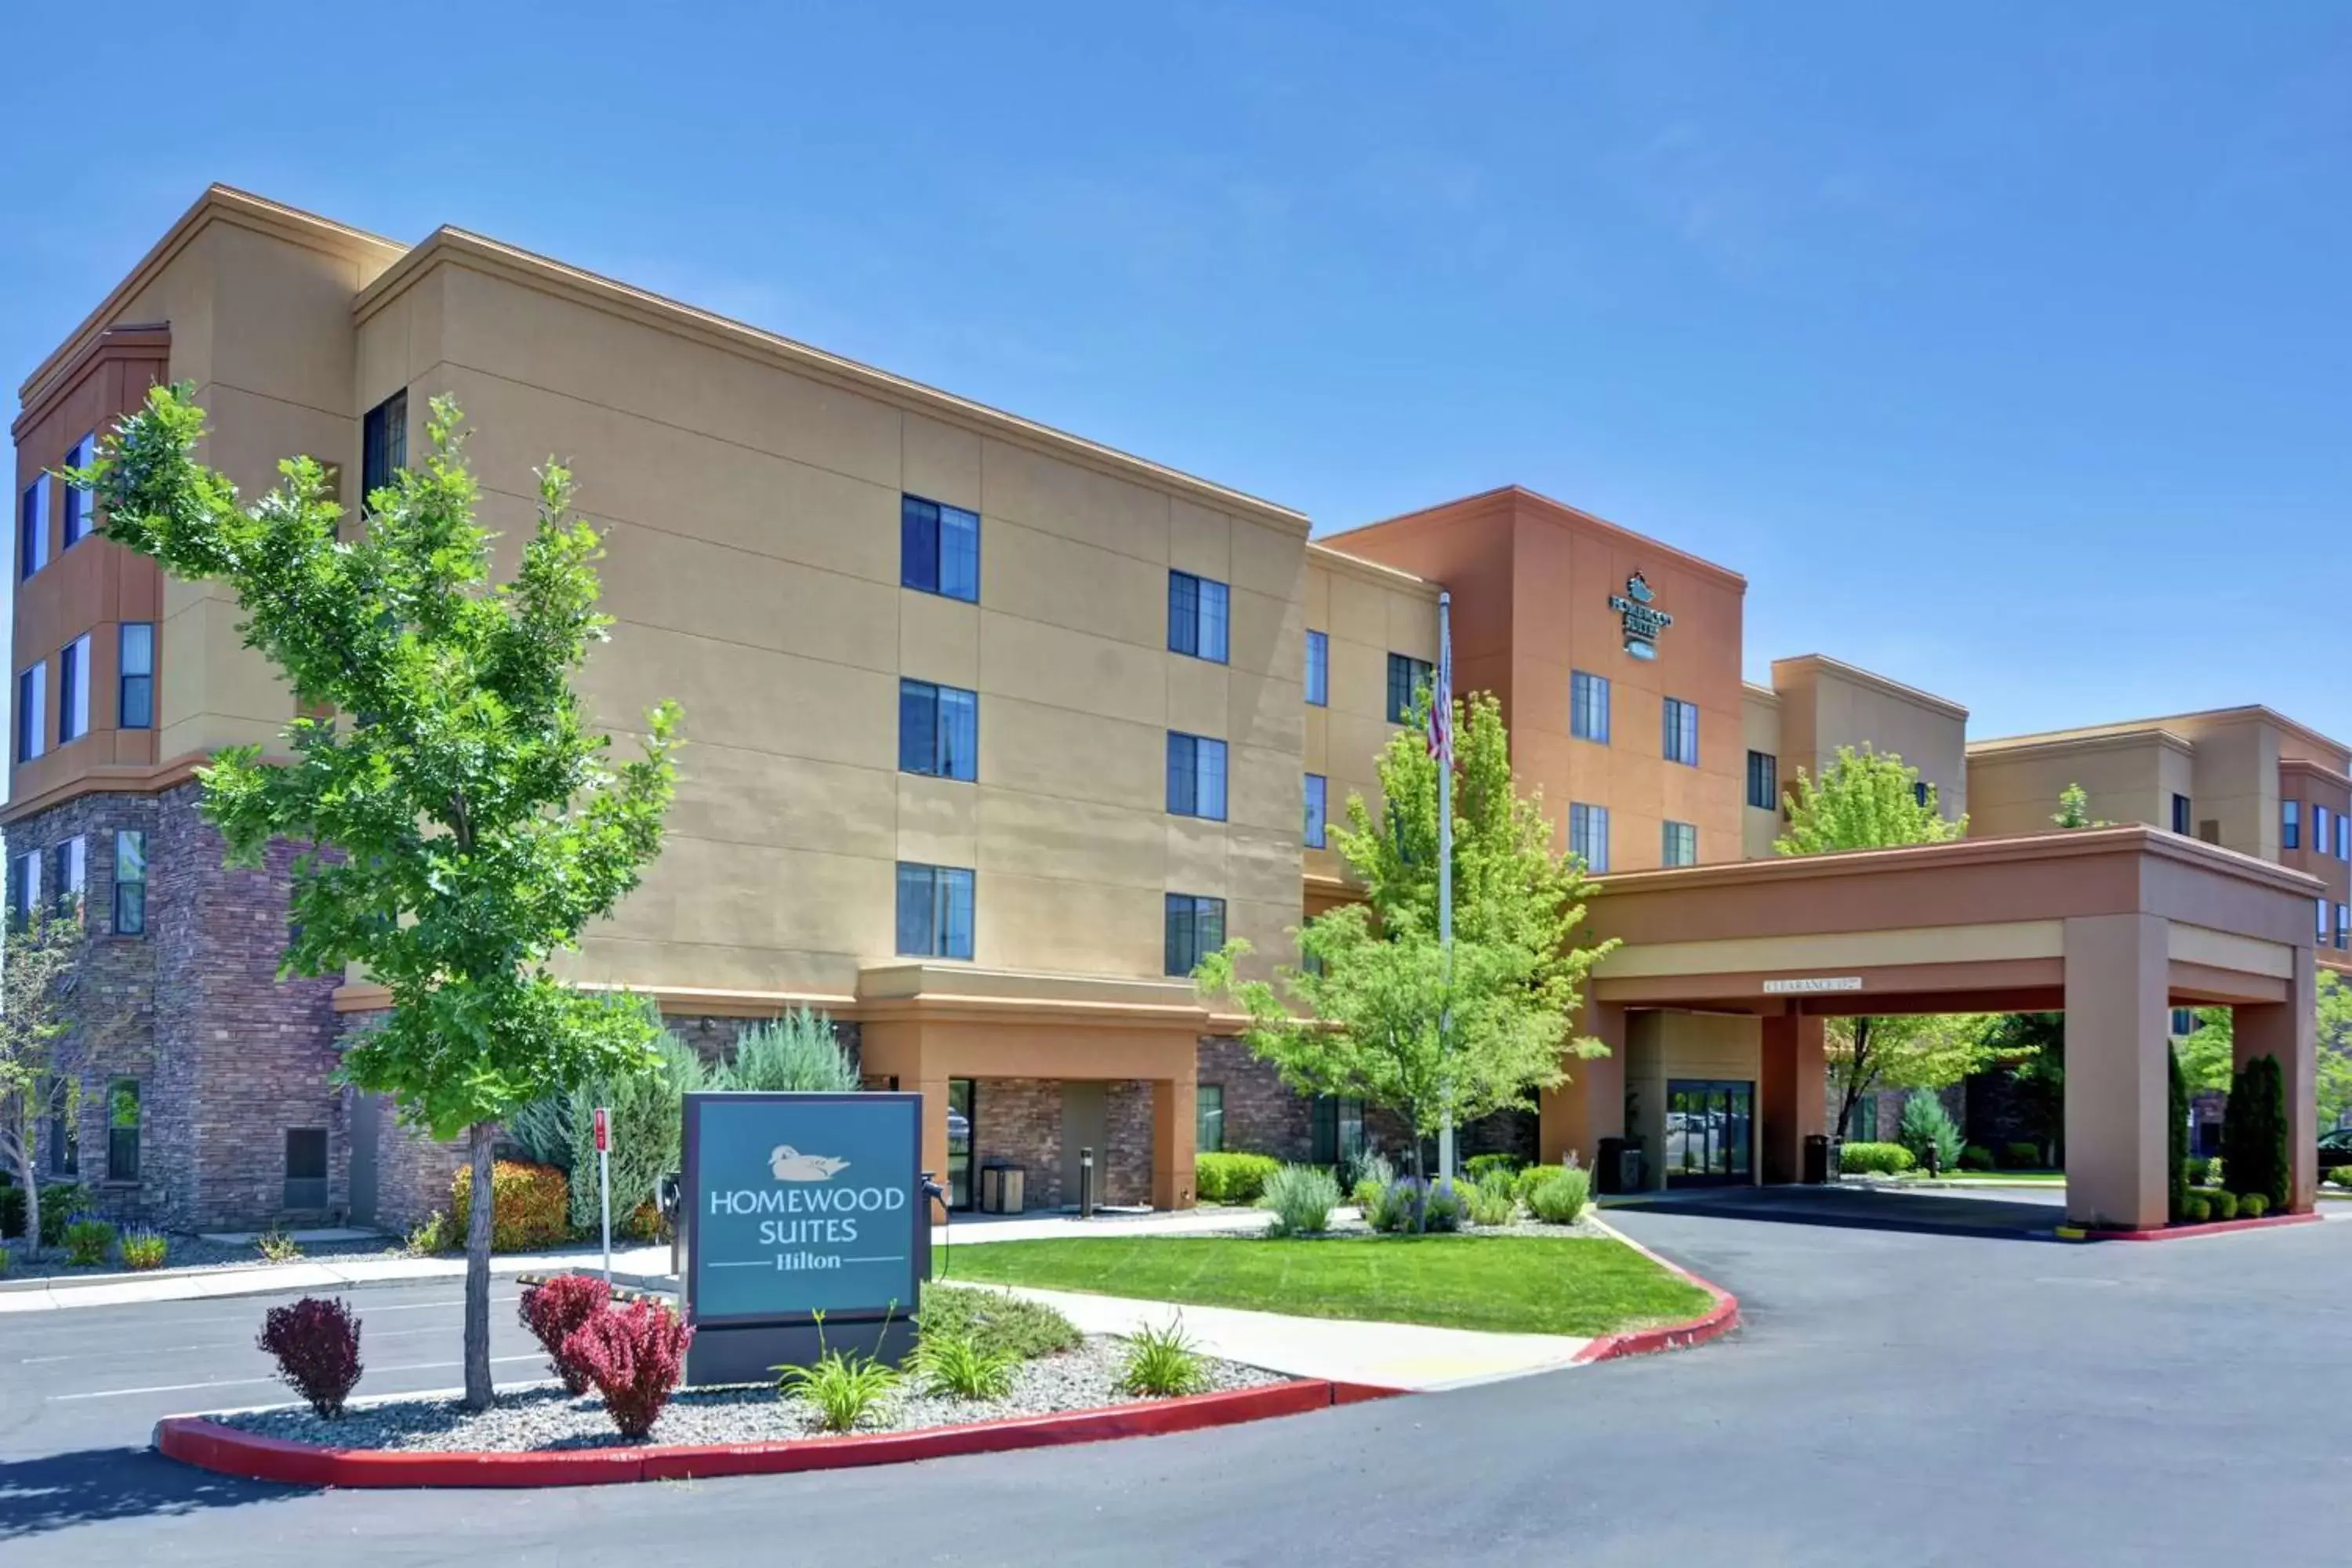 Property Building in Homewood Suites by Hilton Reno